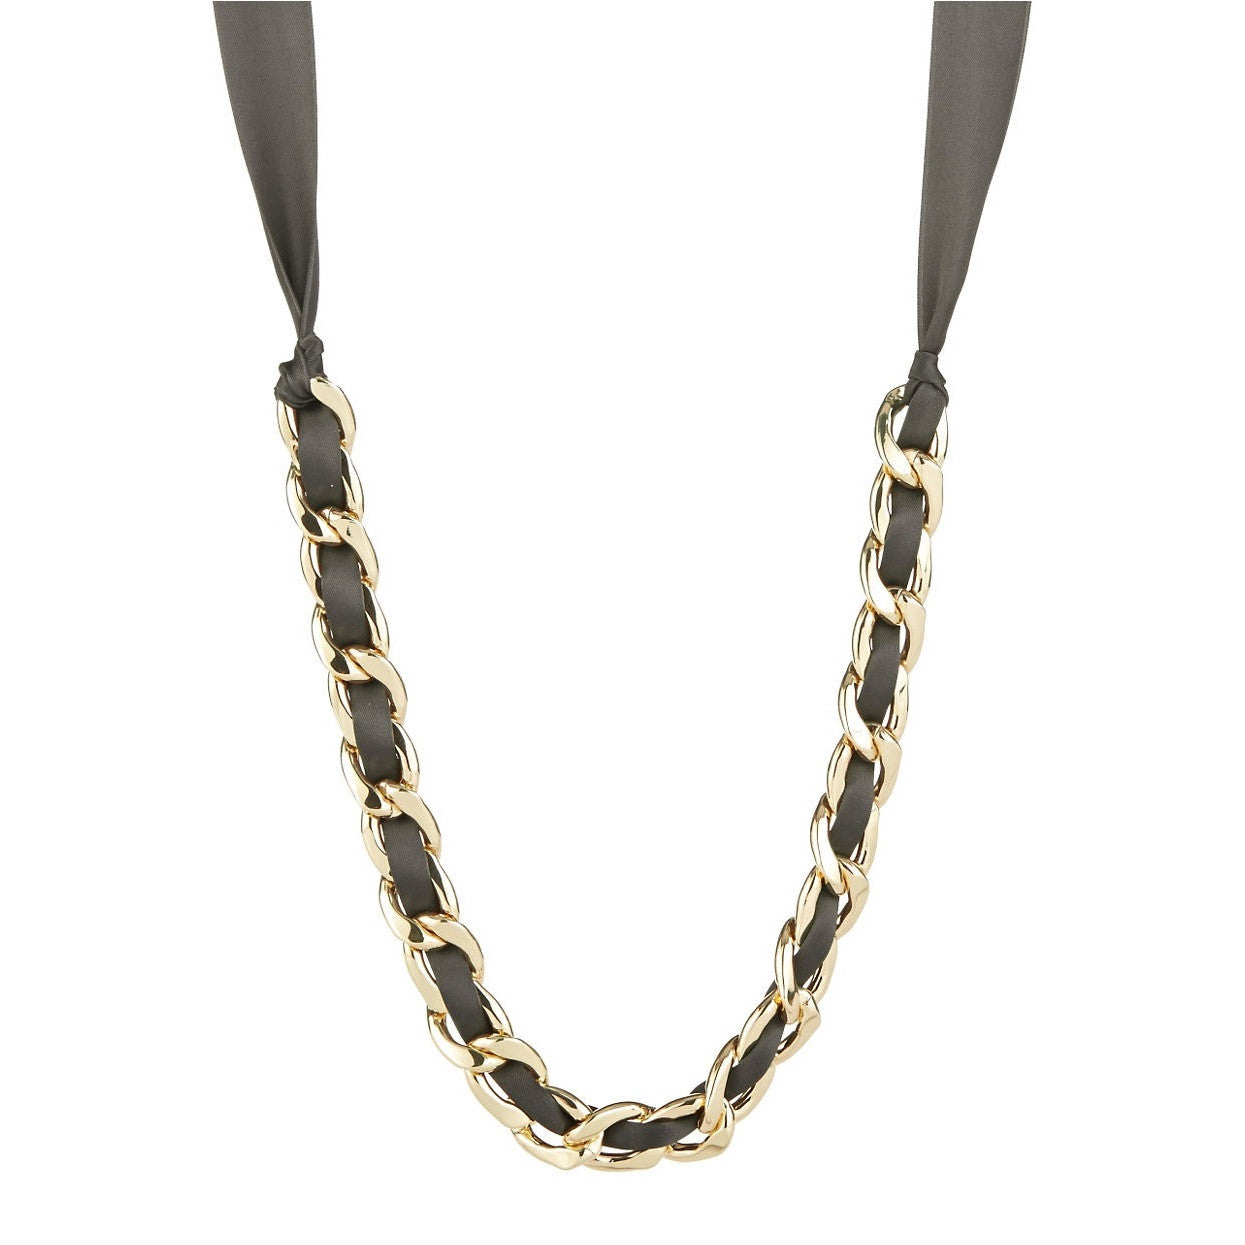 R.J. Graziano Black Ribbon and Gold Curb Chain Necklace